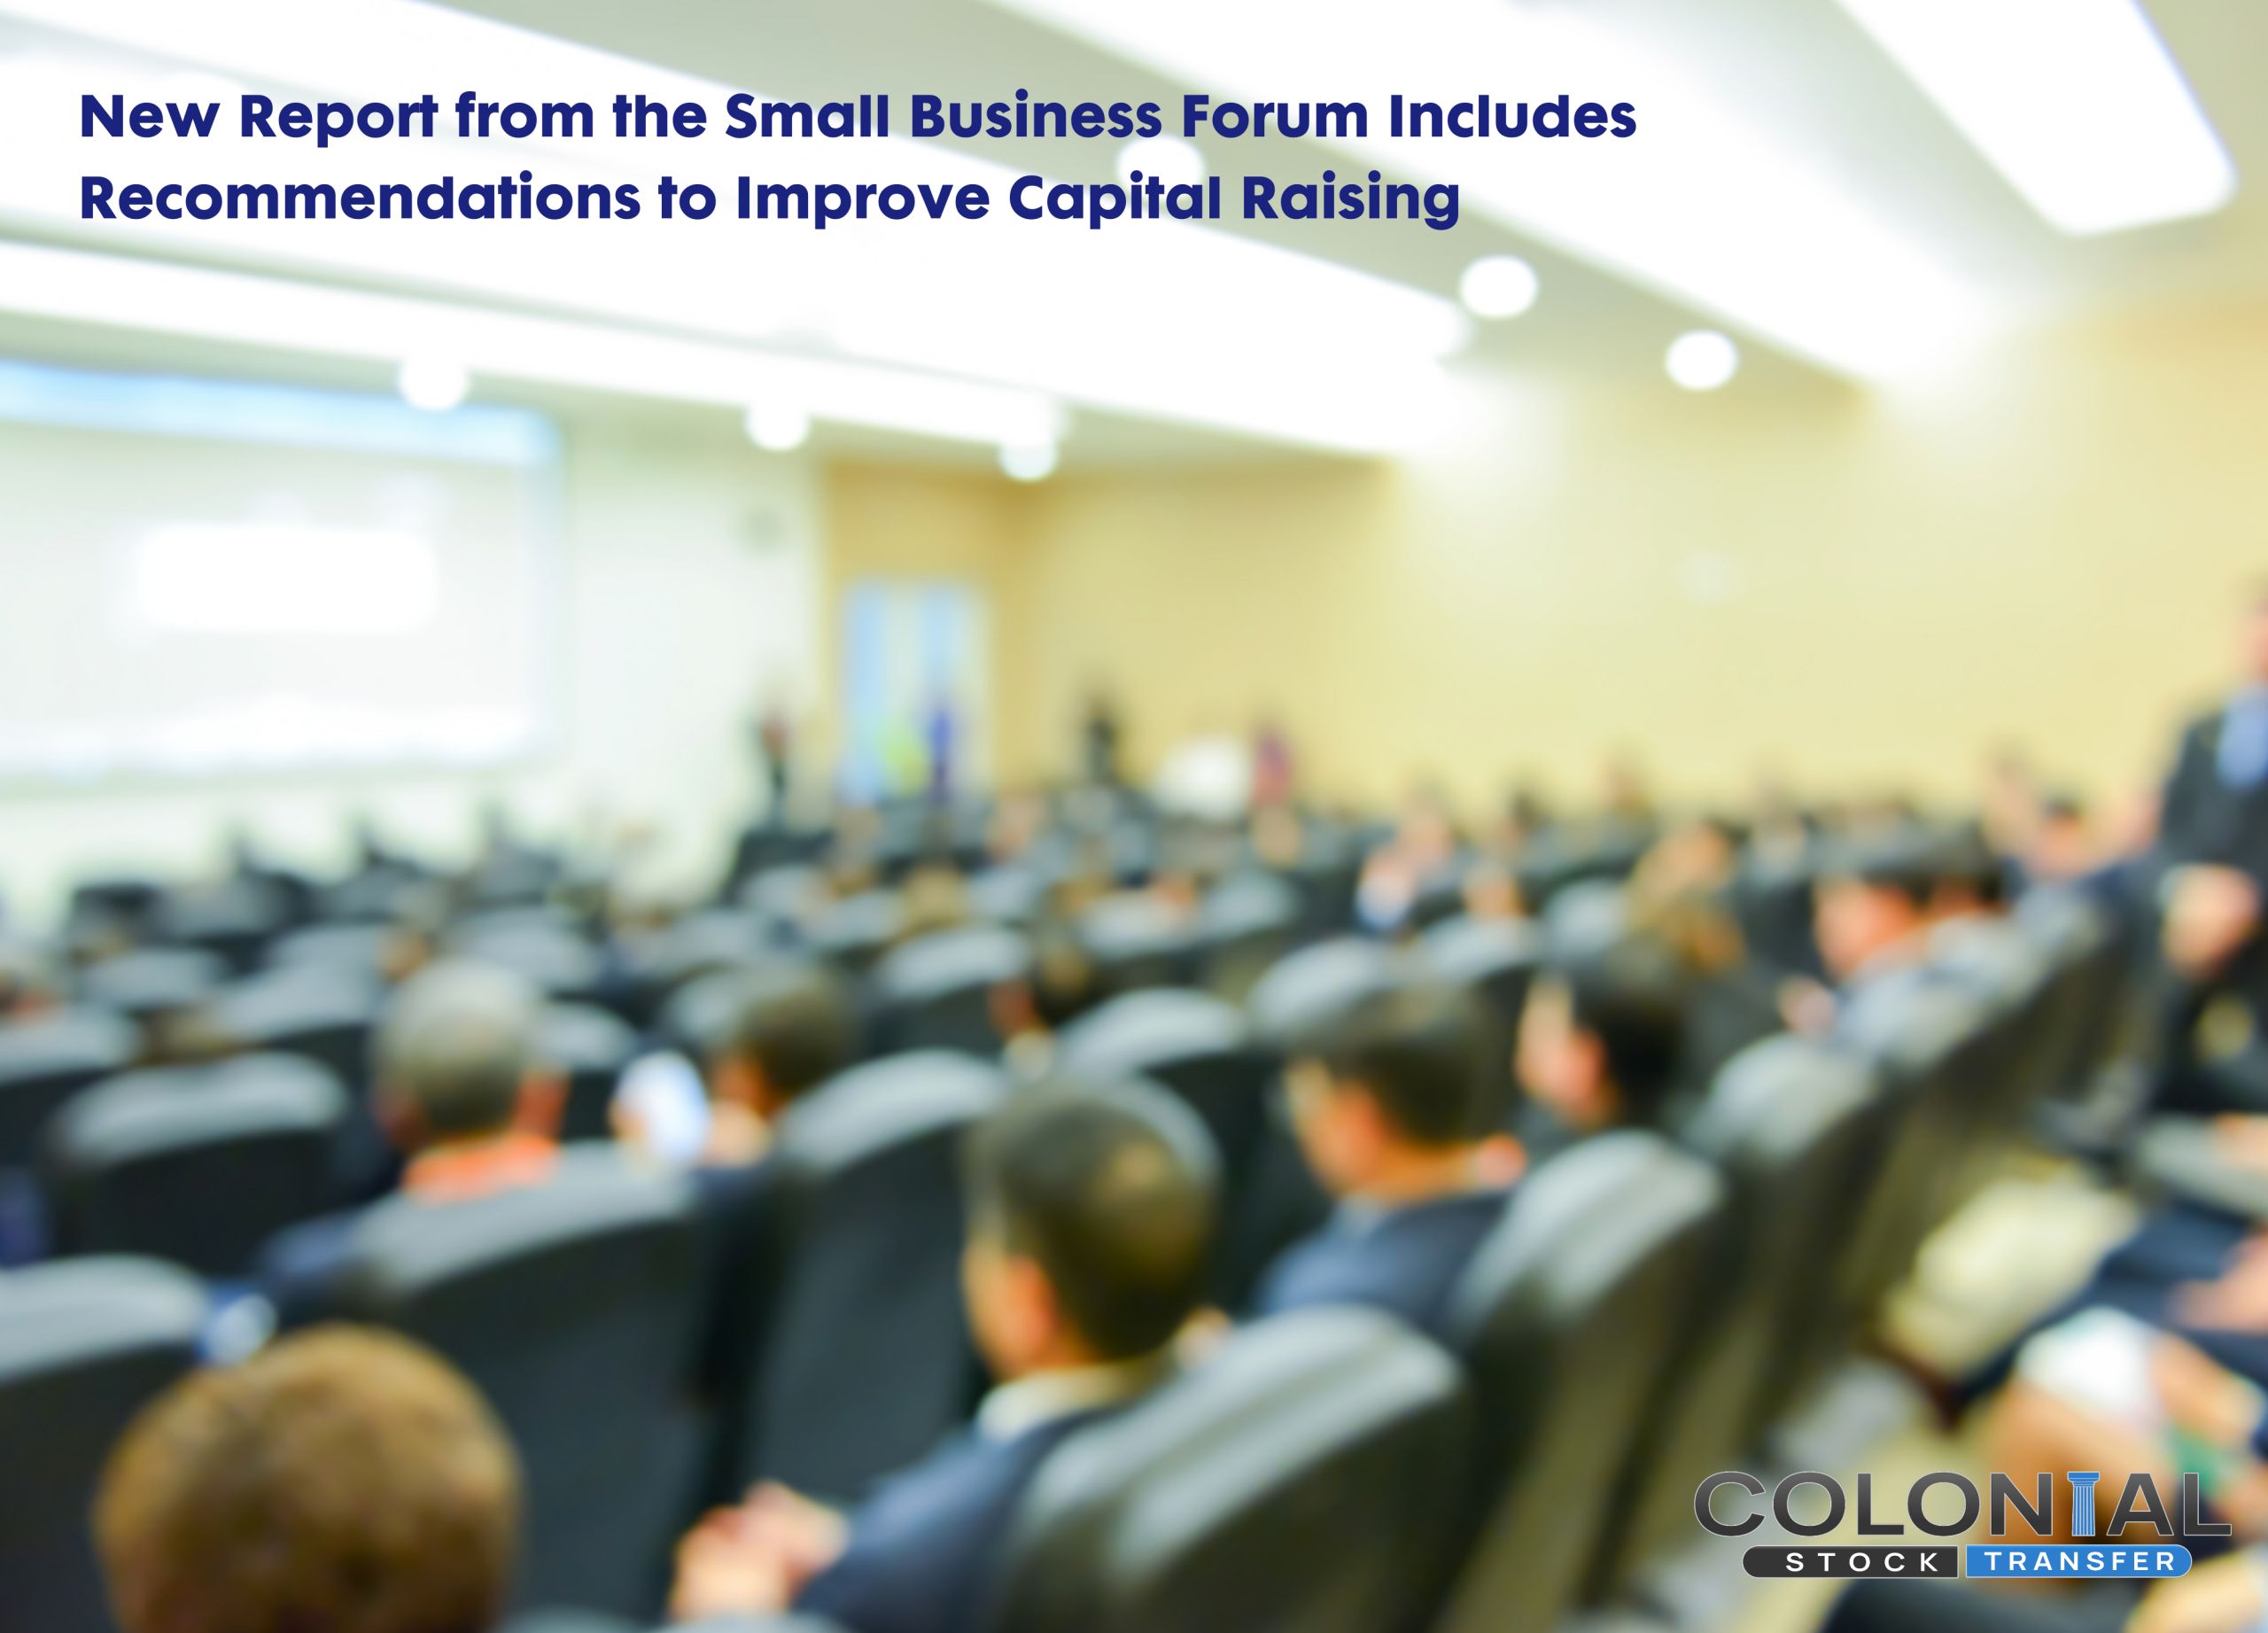 New Report from the Small Business Forum Includes Recommendations to Improve Capital Raising